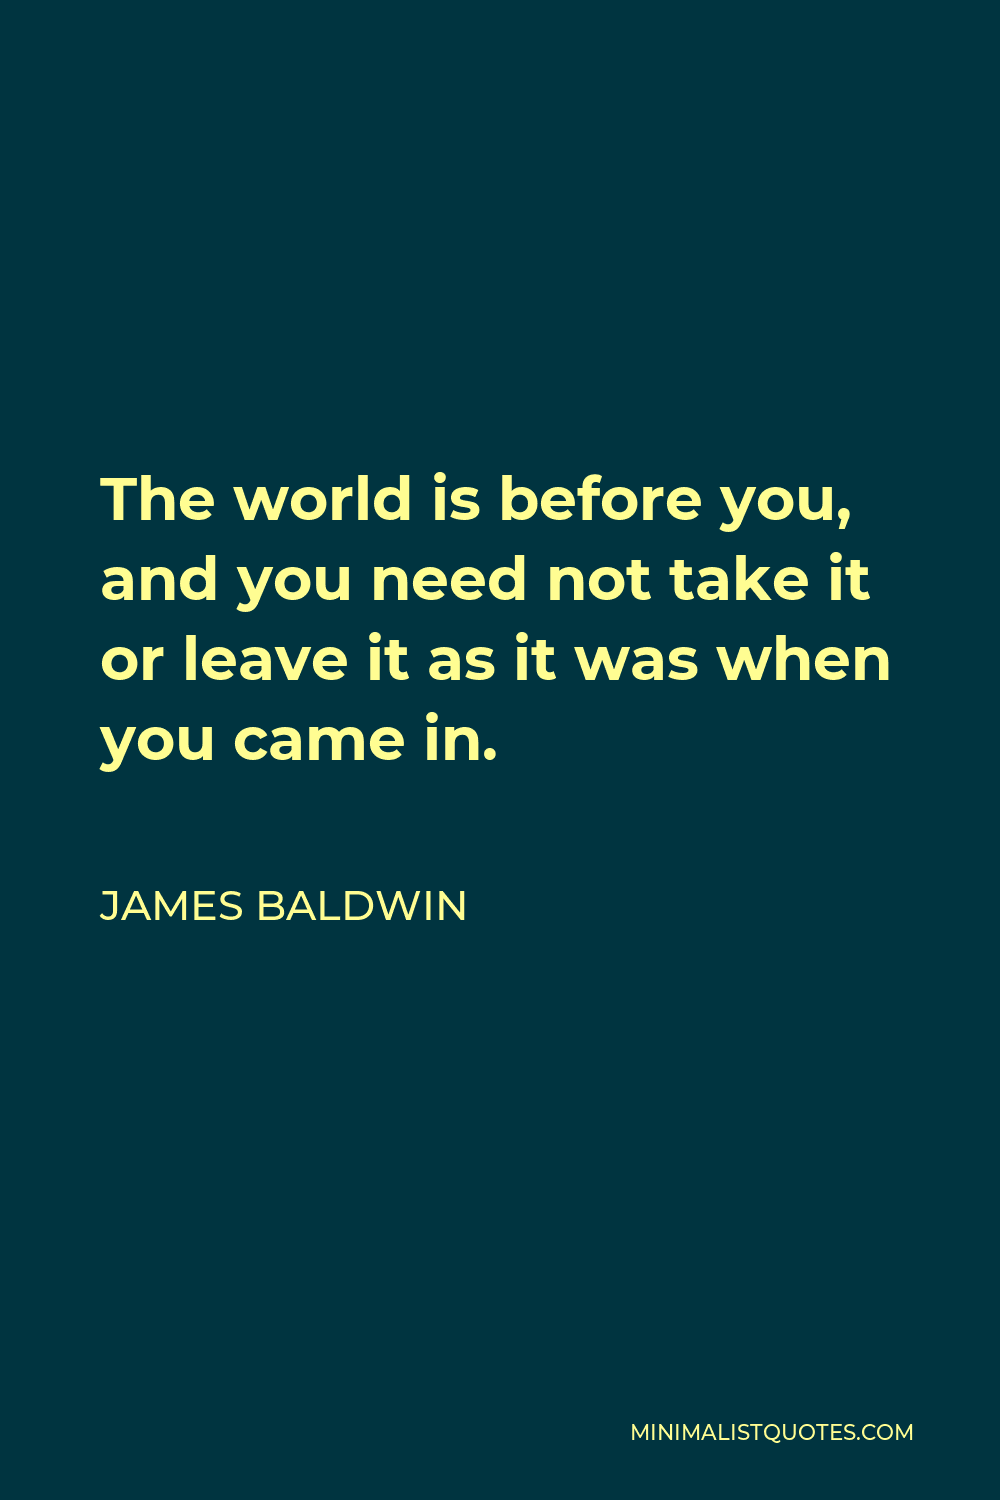 James Baldwin Quote - The world is before you, and you need not take it or leave it as it was when you came in.